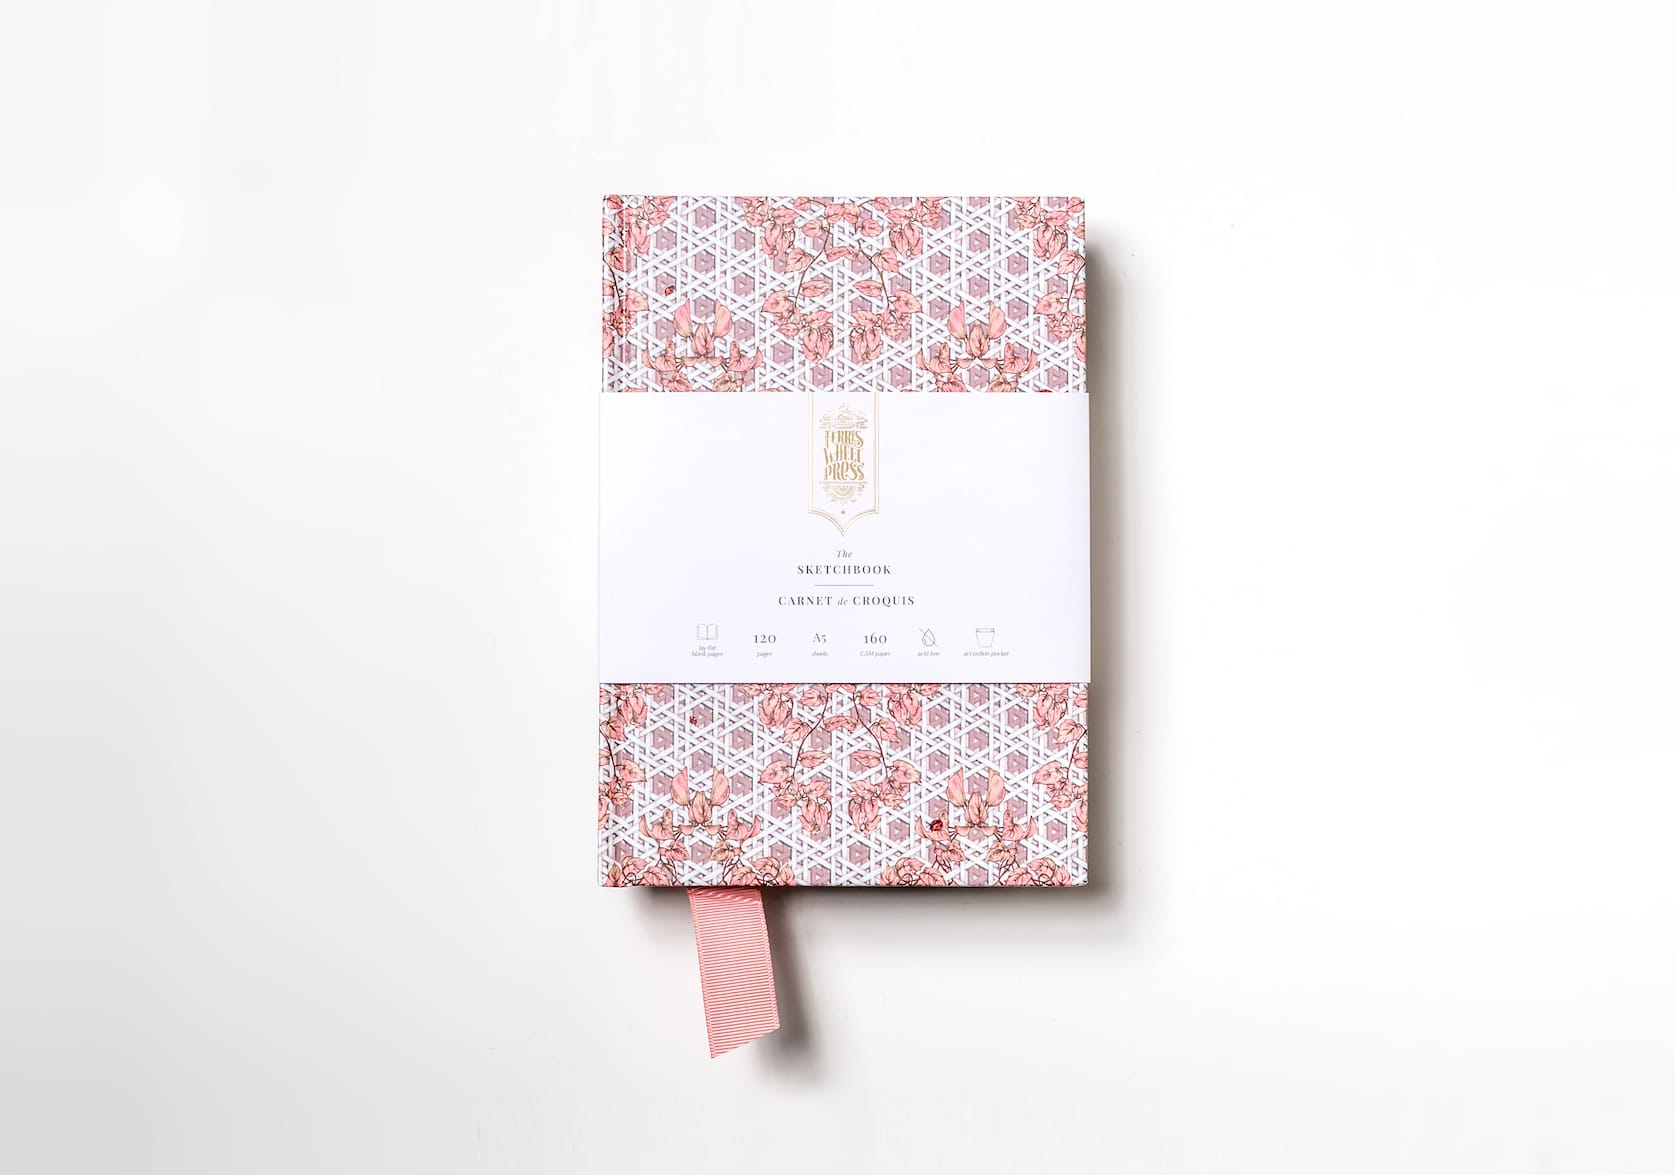 A pink sketchbook covered in paper with a hand-illustrated rattan pattern featuring a pink fabric ribbon sticking out of the bottom. Gold text on the notebook's packaging reads: Ferris Wheel Press logo. The Sketchbook. Carnet de Croquis.